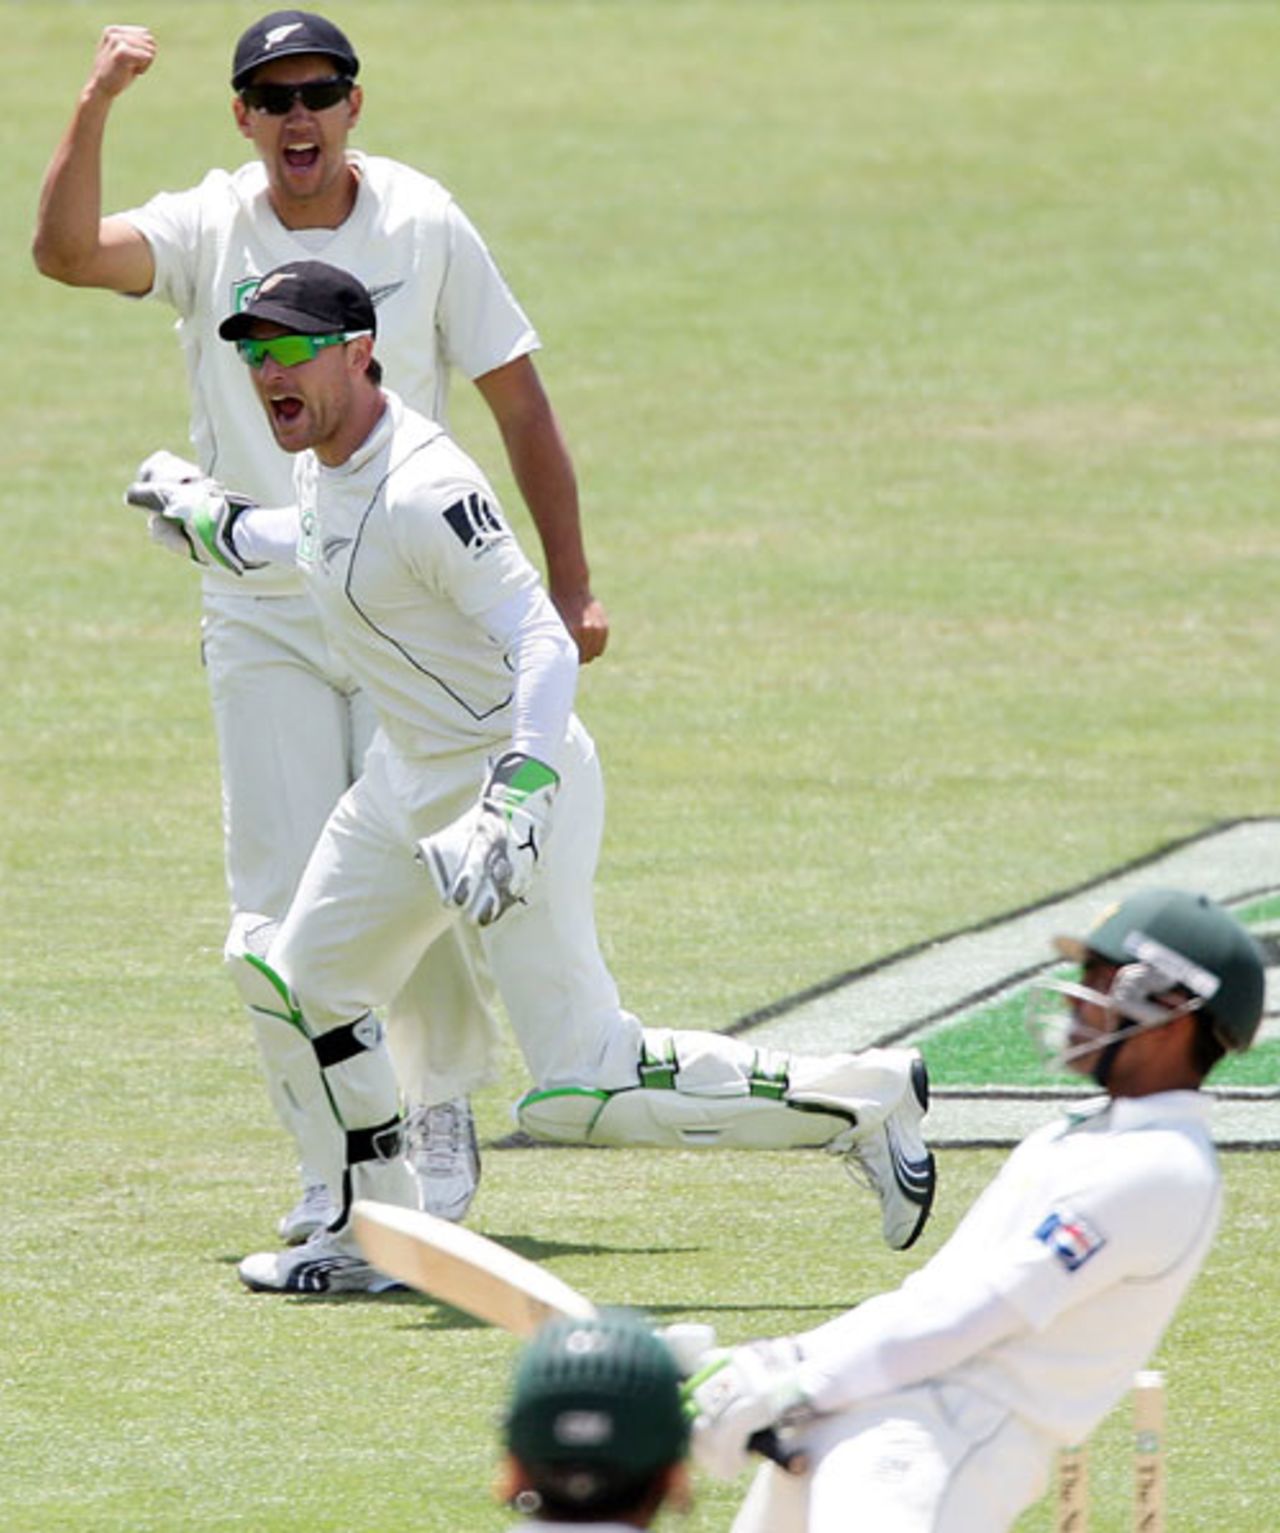 Brendon McCullum and Ross Taylor are thrilled after Umar Akmal edges a catch, New Zealand v Pakistan, 3rd Test, Napier, 5th day, December 15, 2009